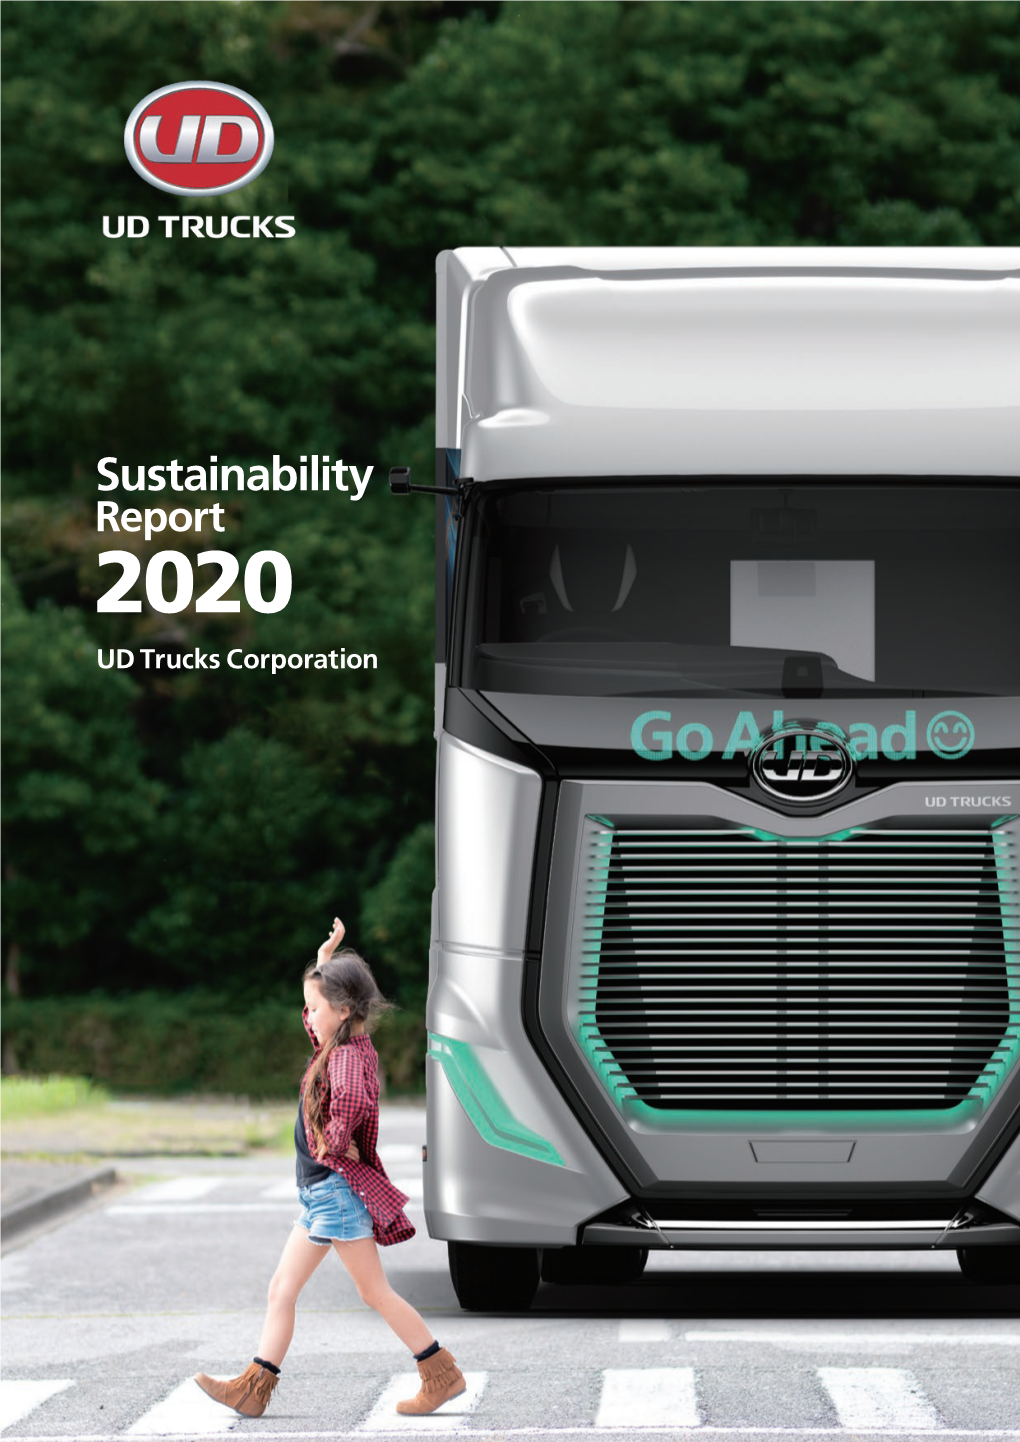 Sustainability Report 2020 UD Trucks at a Glance